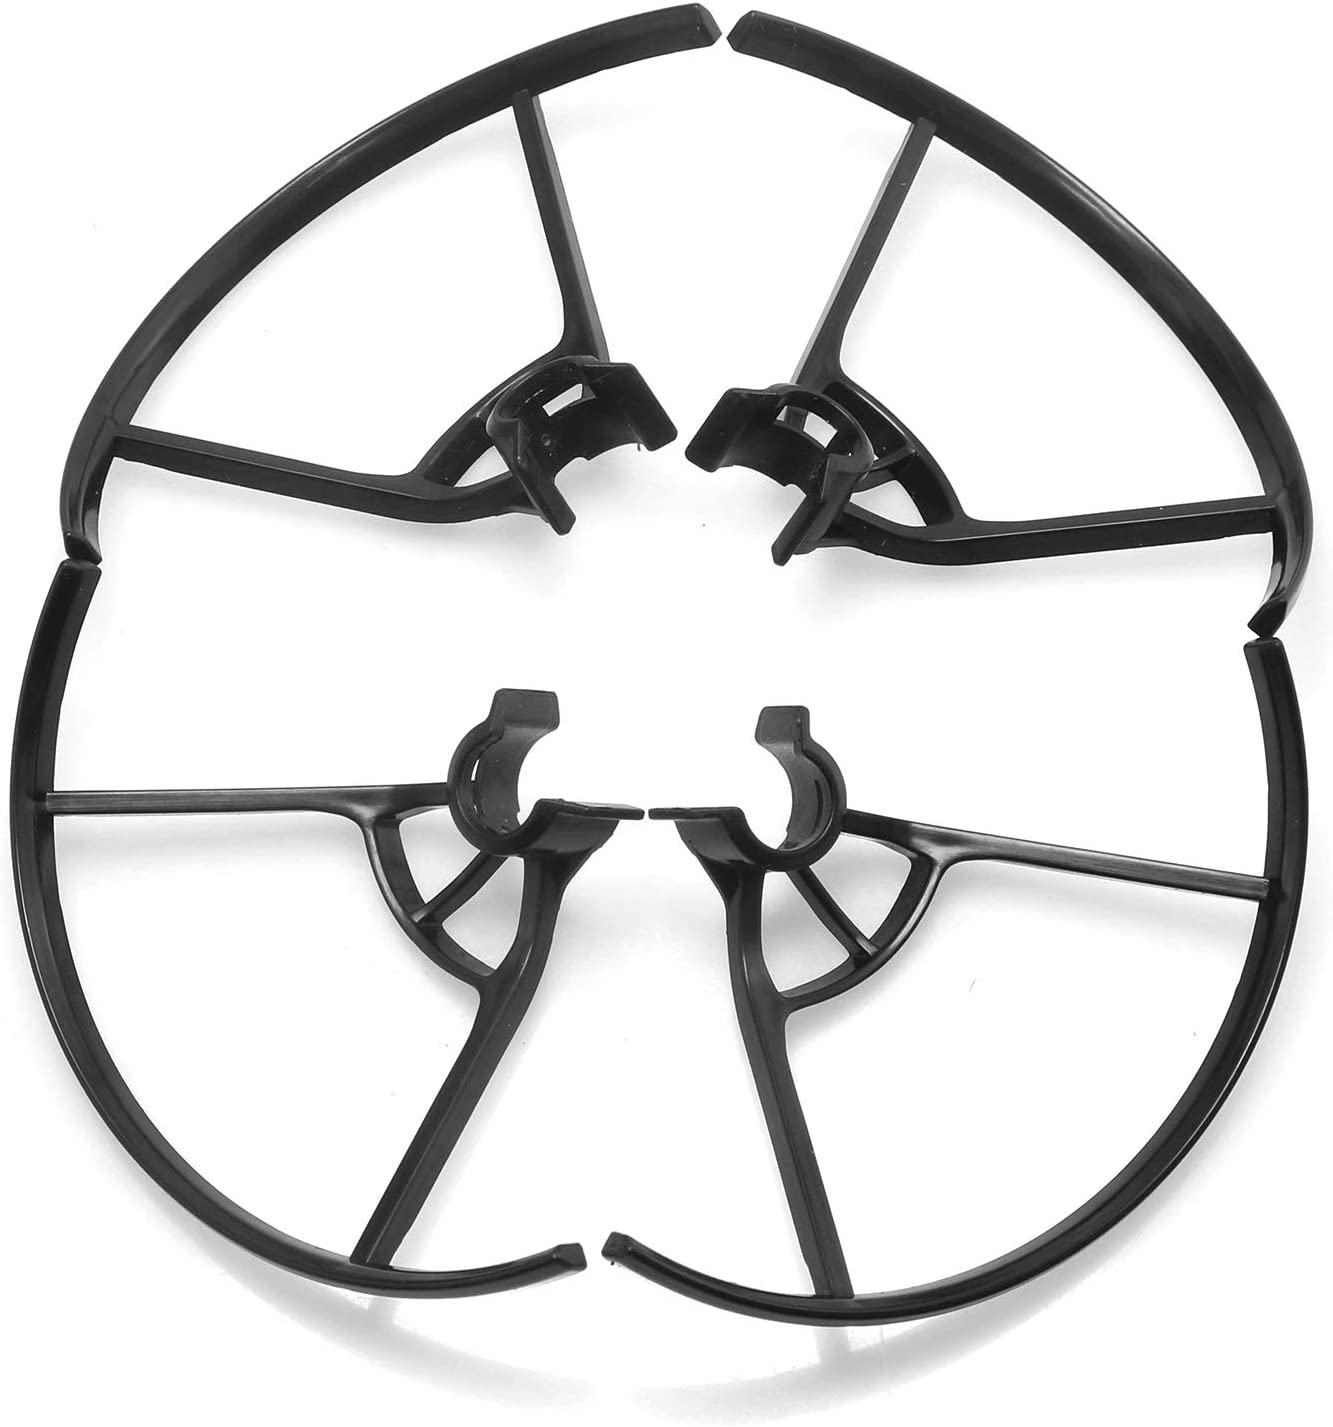 Props Guard For Dji Tello Propeller Protection Guard Accessories GetZget